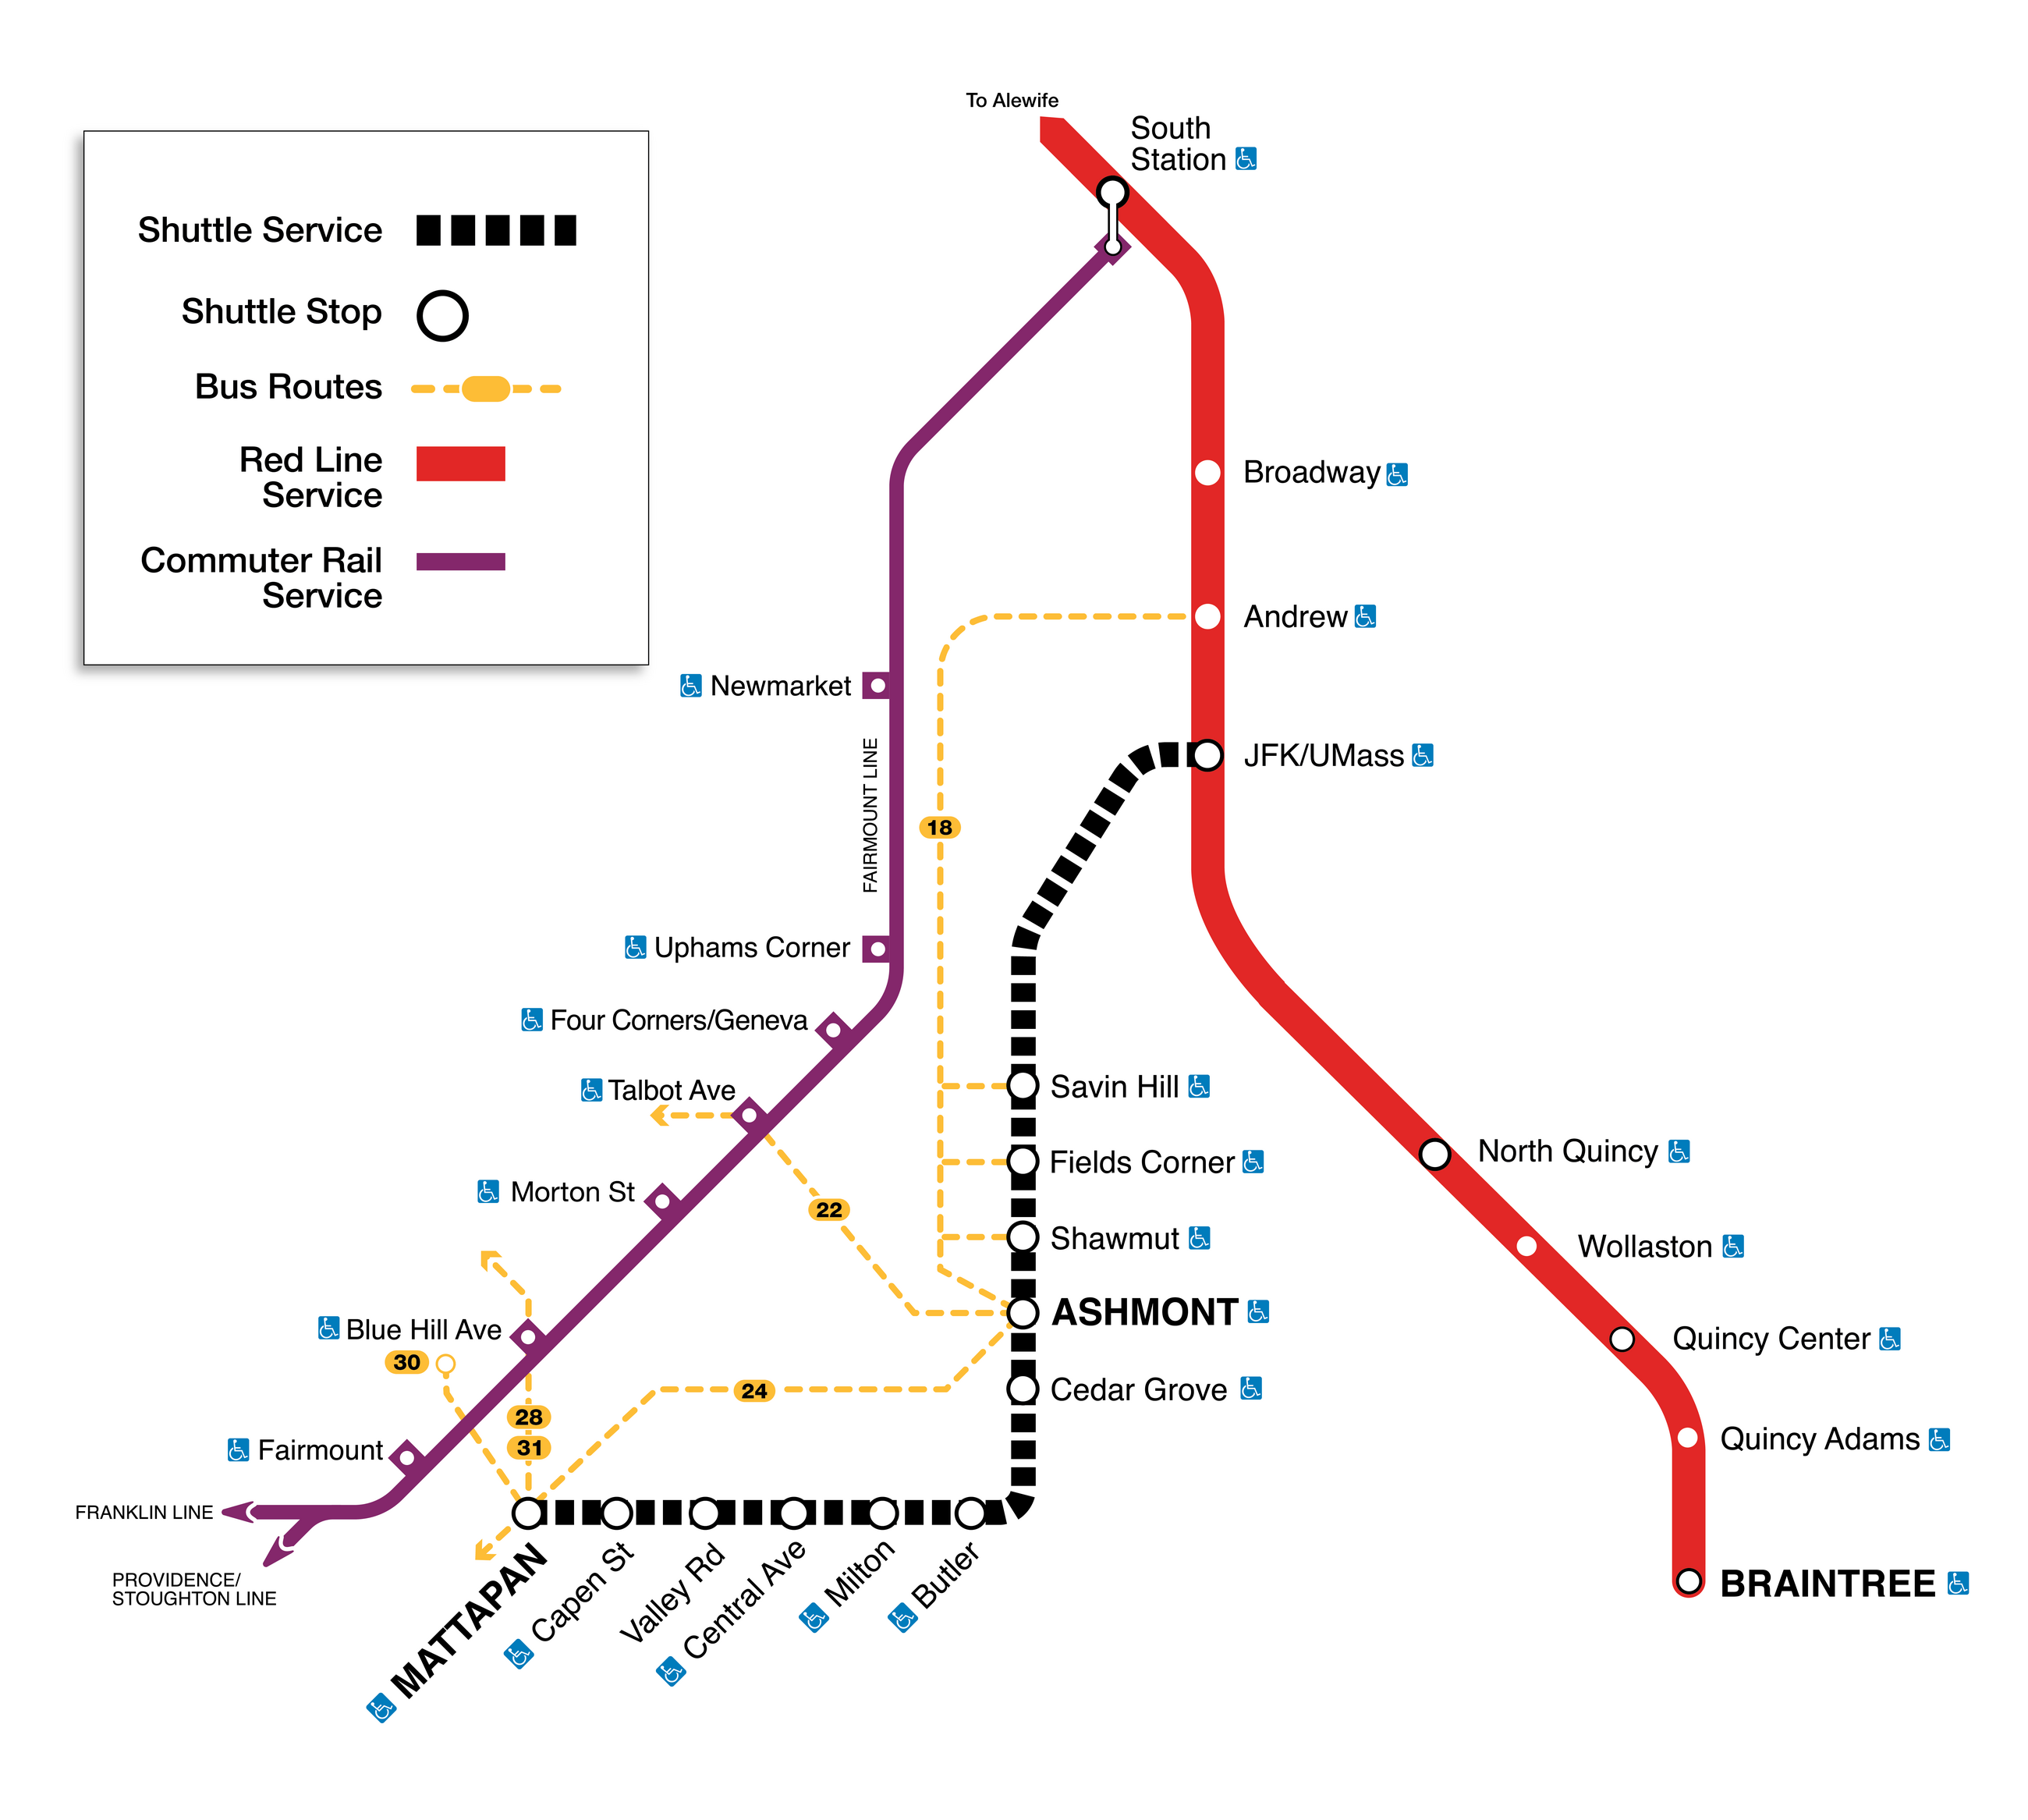 Subway map of shuttle bus stops for the Mattapan Trolley and Ashmont Red Line service shutdown. Shuttle buses stop at or near the following stations: Mattapan, Capen Street, Valley Road, Central Avenue, Milton, Butler, Cedar Grove, Ashmont, Shawmut, Fields Corner and Savin Hill for service to JFK UMass.